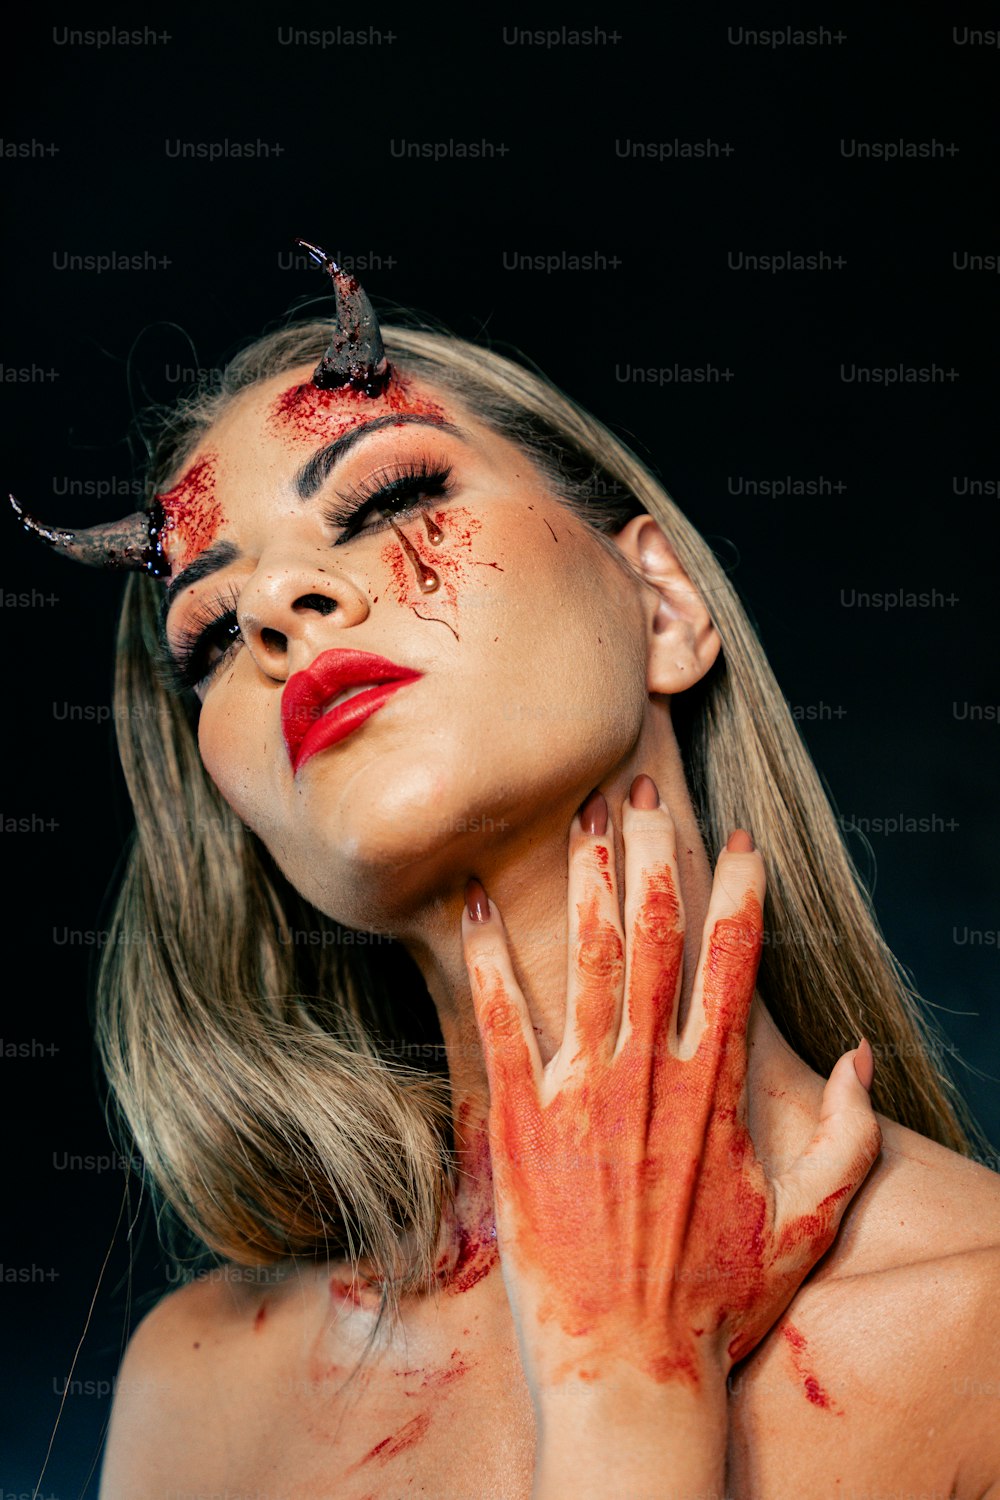 a woman with blood on her face and hands